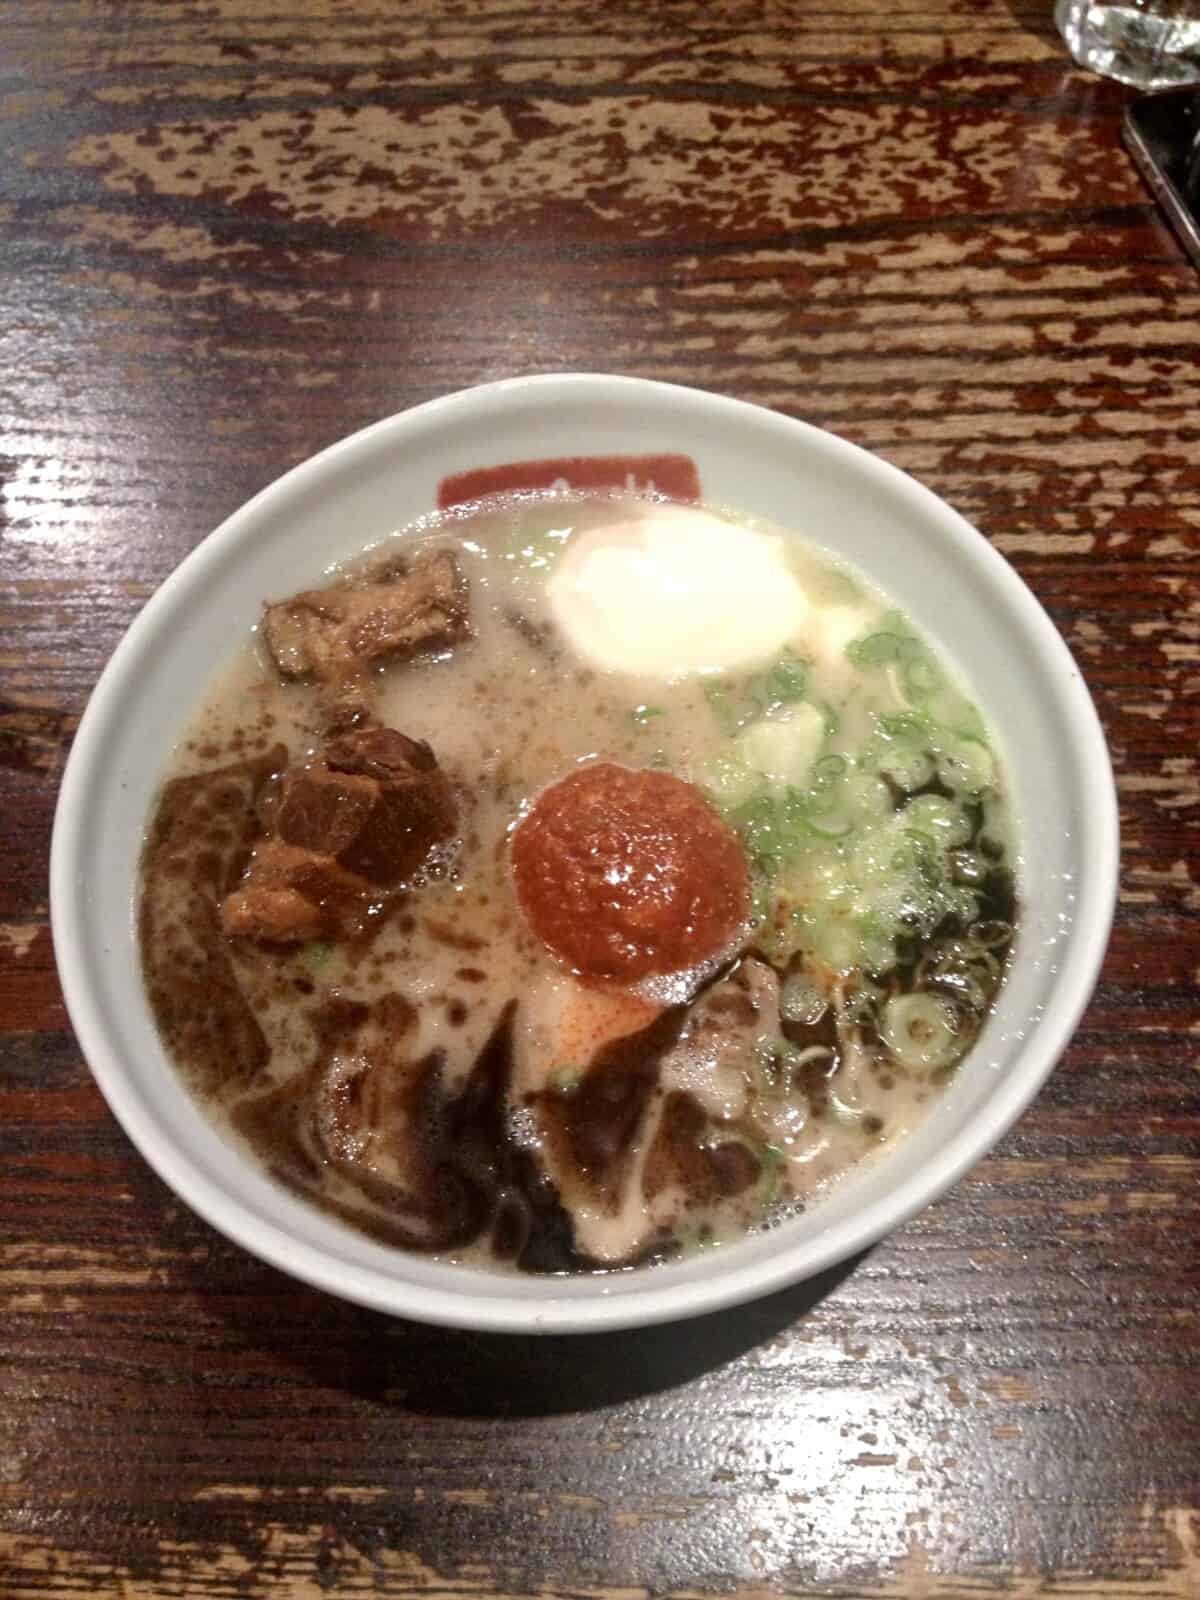 A bowl of ramen with custardy ramen eggs floating in the broth with tender chashu pork and a large mound of spicy tare topping